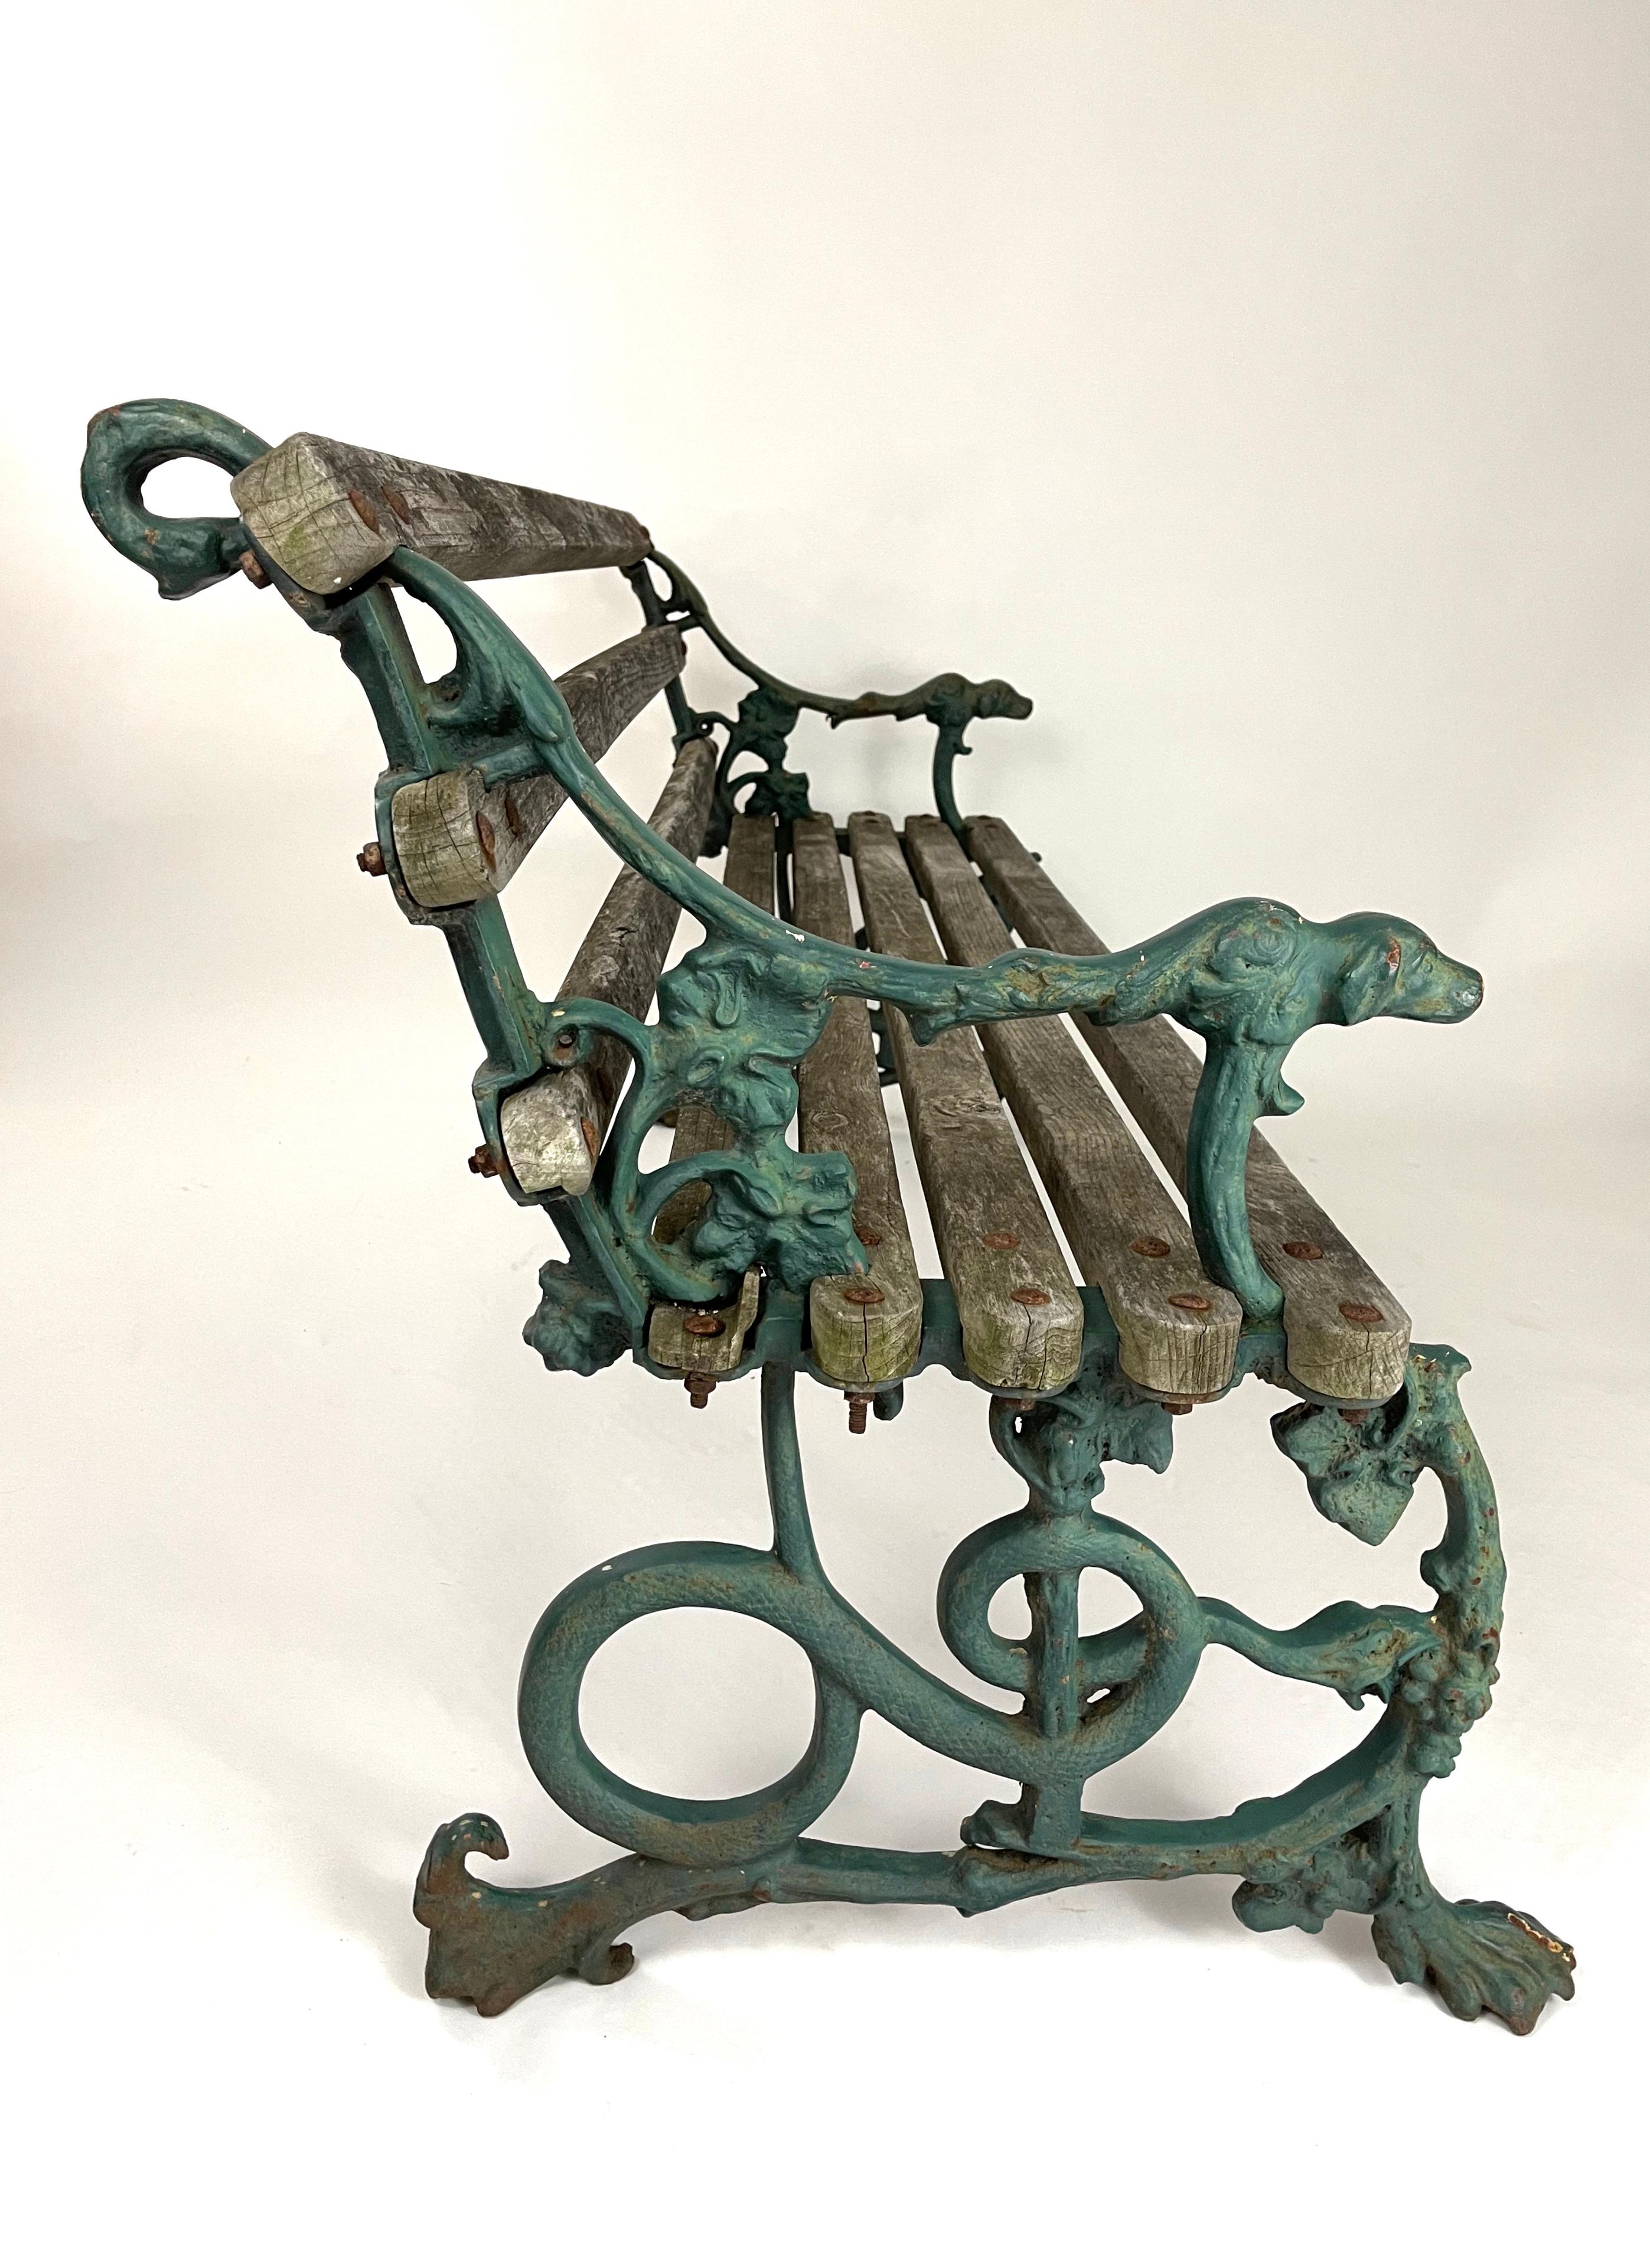 A beautifully designed and very comfortable 19th century English cast iron garden bench by the celebrated Colebrookdale foundry, with very solid and nicely weathered oak slats at just the right angle, flanked by whimsically designed, green painted